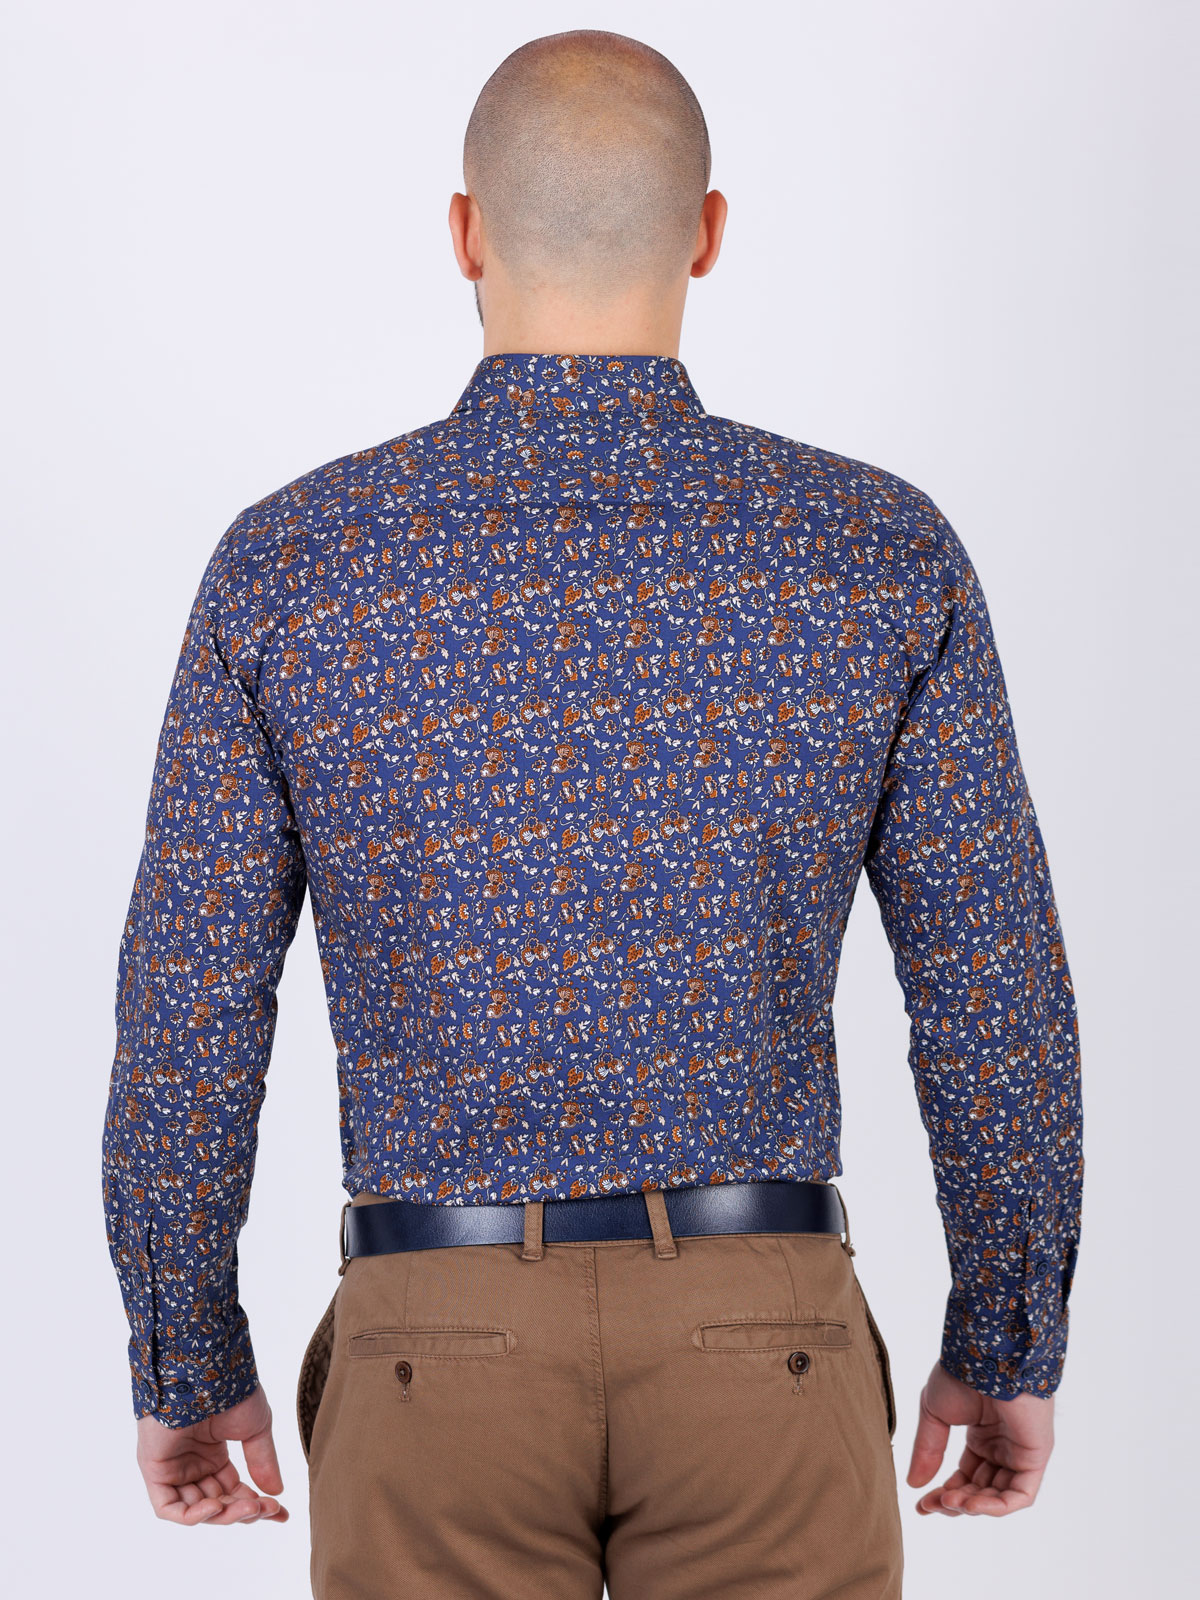 Shirt in dark blue with leaves - 21548 € 43.87 img2